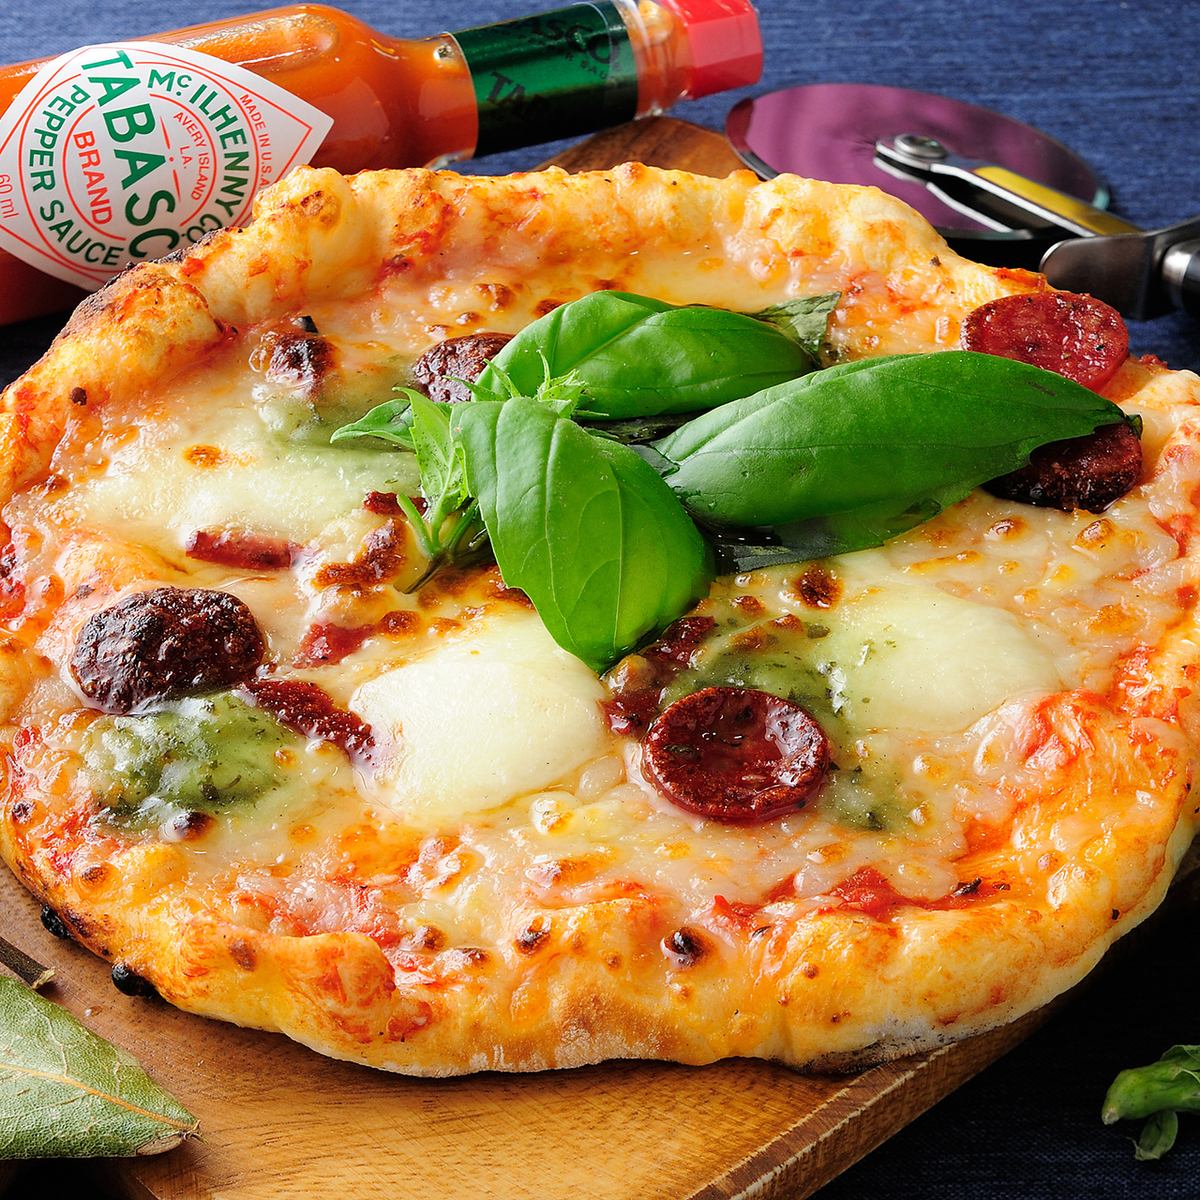 How about some authentic pizza baked in our in-store pizza oven?